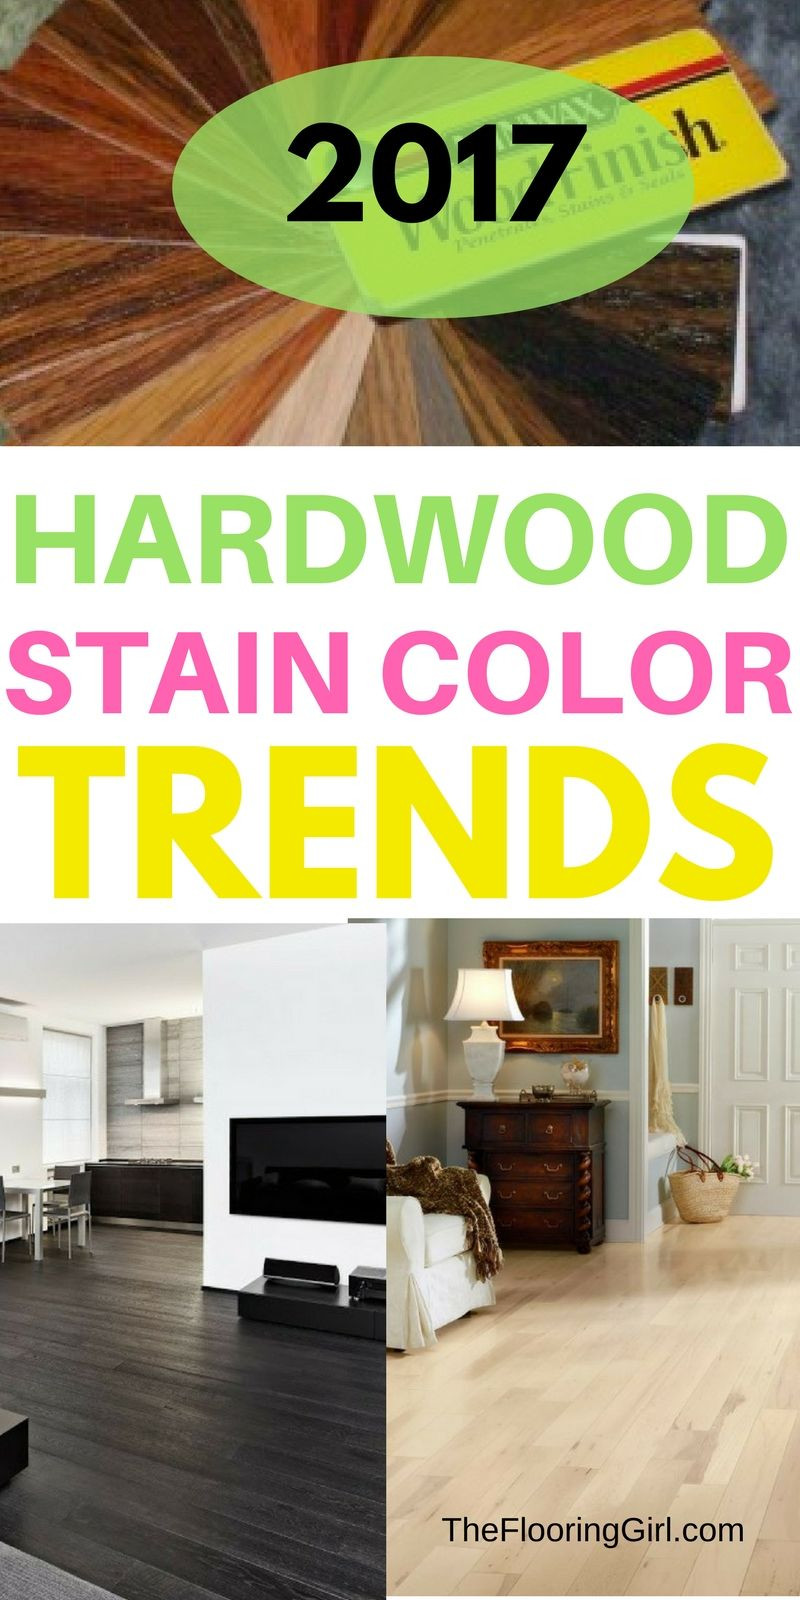 12 Trendy Hardwood Flooring Tips and Tricks 2024 free download hardwood flooring tips and tricks of hardwood flooring stain color trends 2018 more from the flooring with hardwood flooring stain color trends for 2017 hardwood colors that are in style the